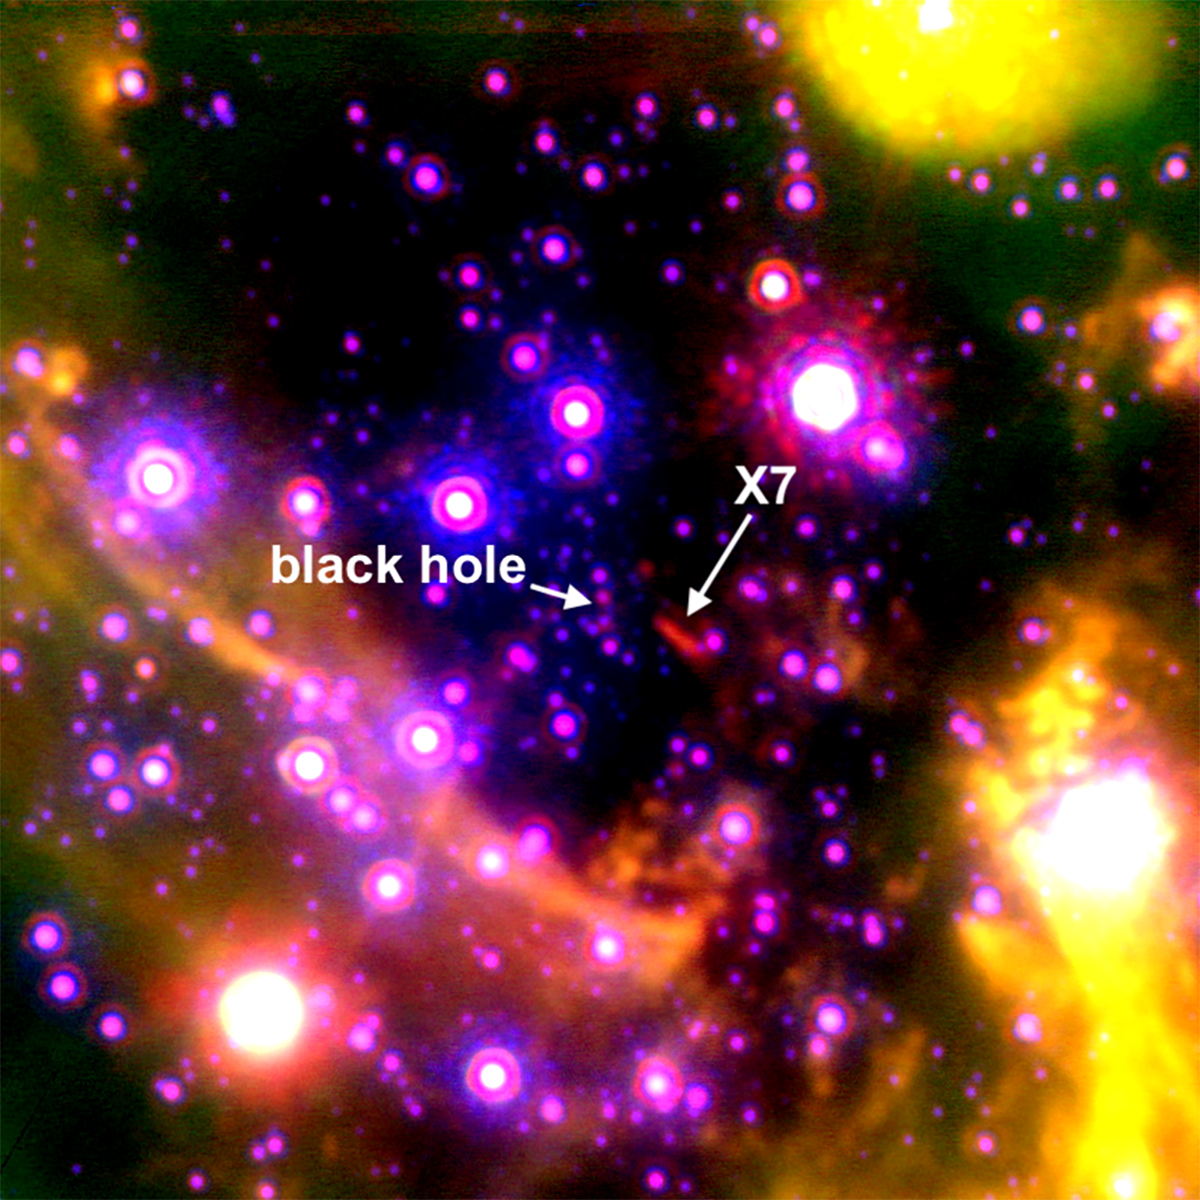 big gas cloud is stretched by the gravity of the milky way galaxy's central black hole